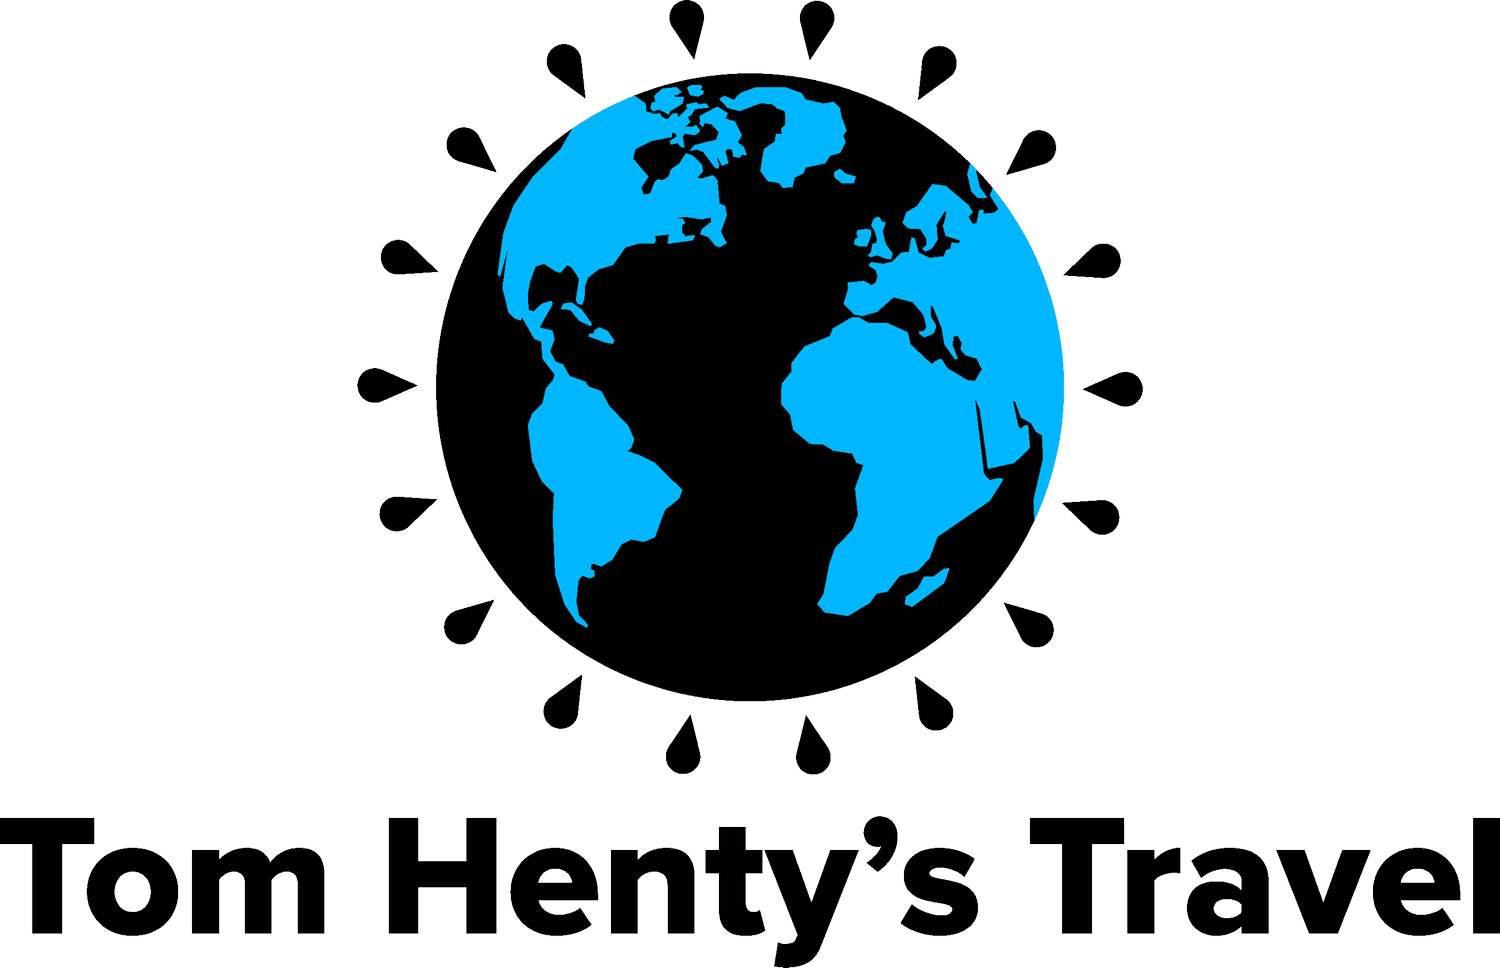 Tom Hentys Travel - Worldwide Travel Content and Information.